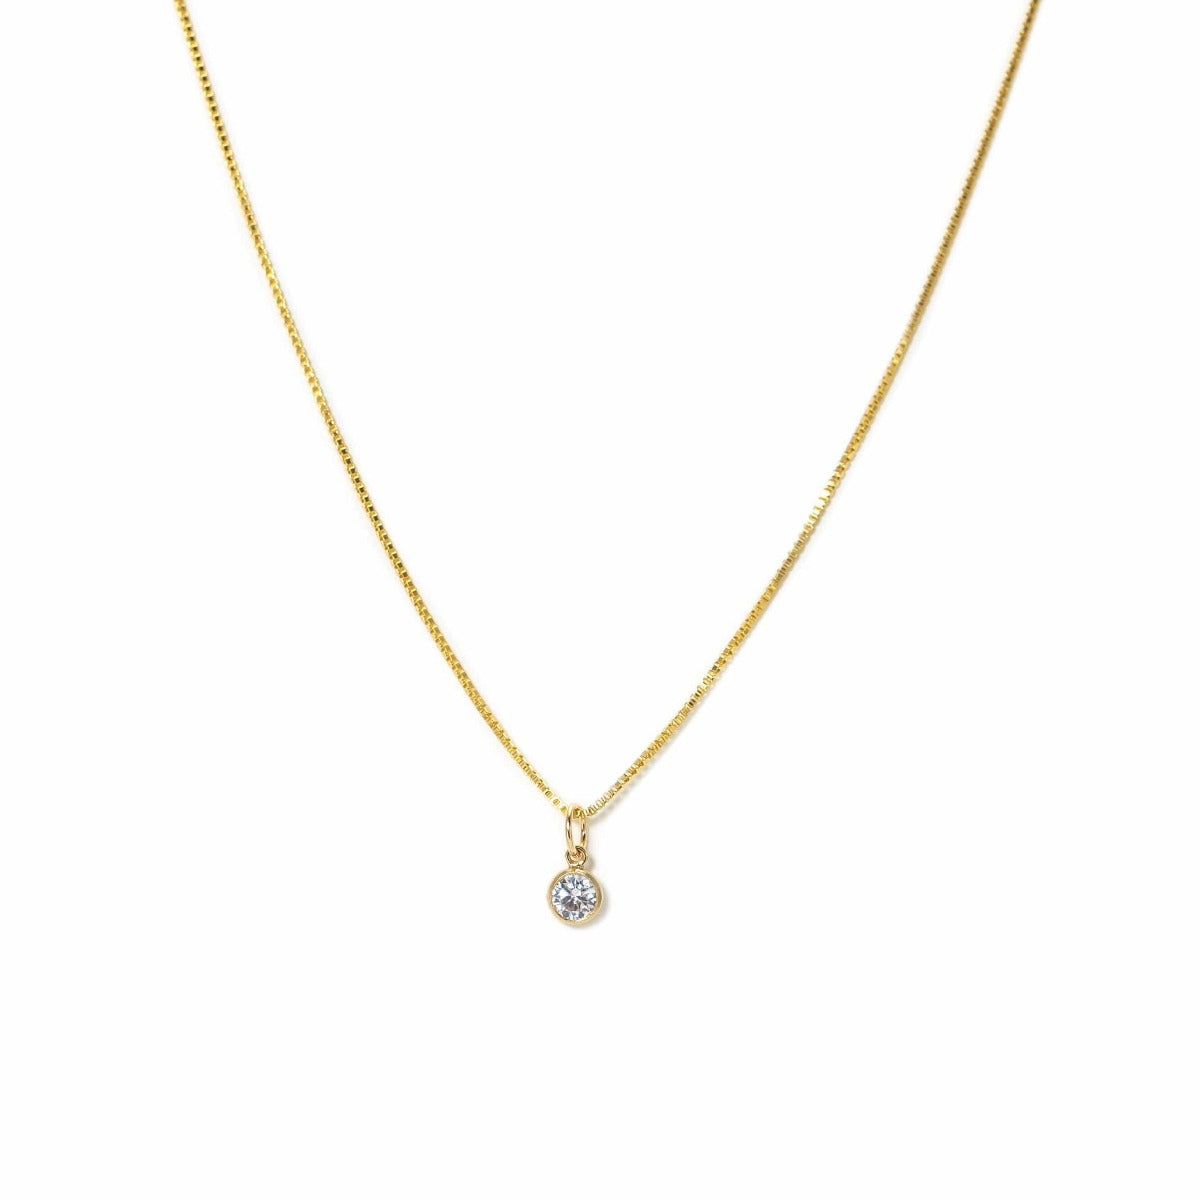 April Birthstone Gold-Filled Charm Necklace
